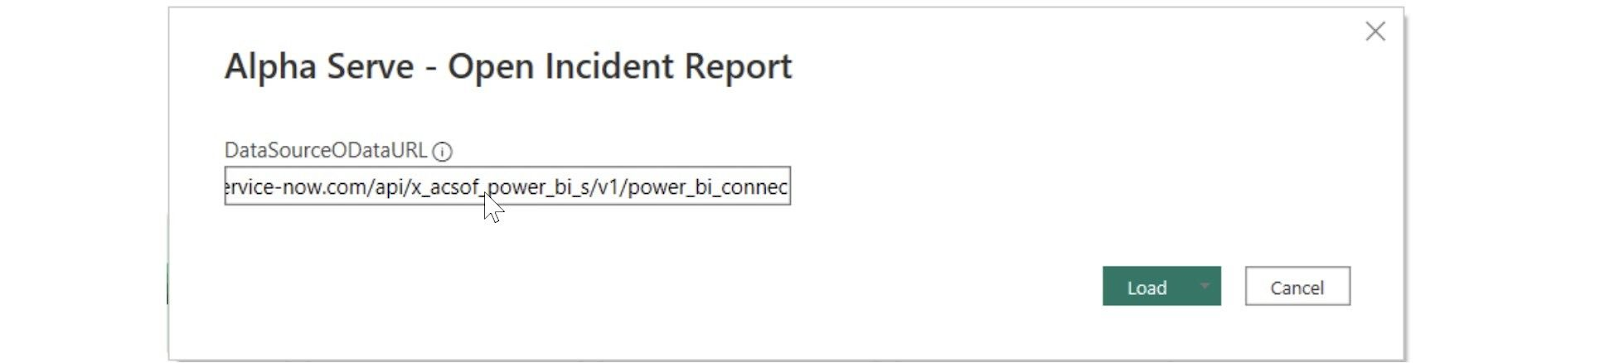 Incident Report for Power Bi Connector